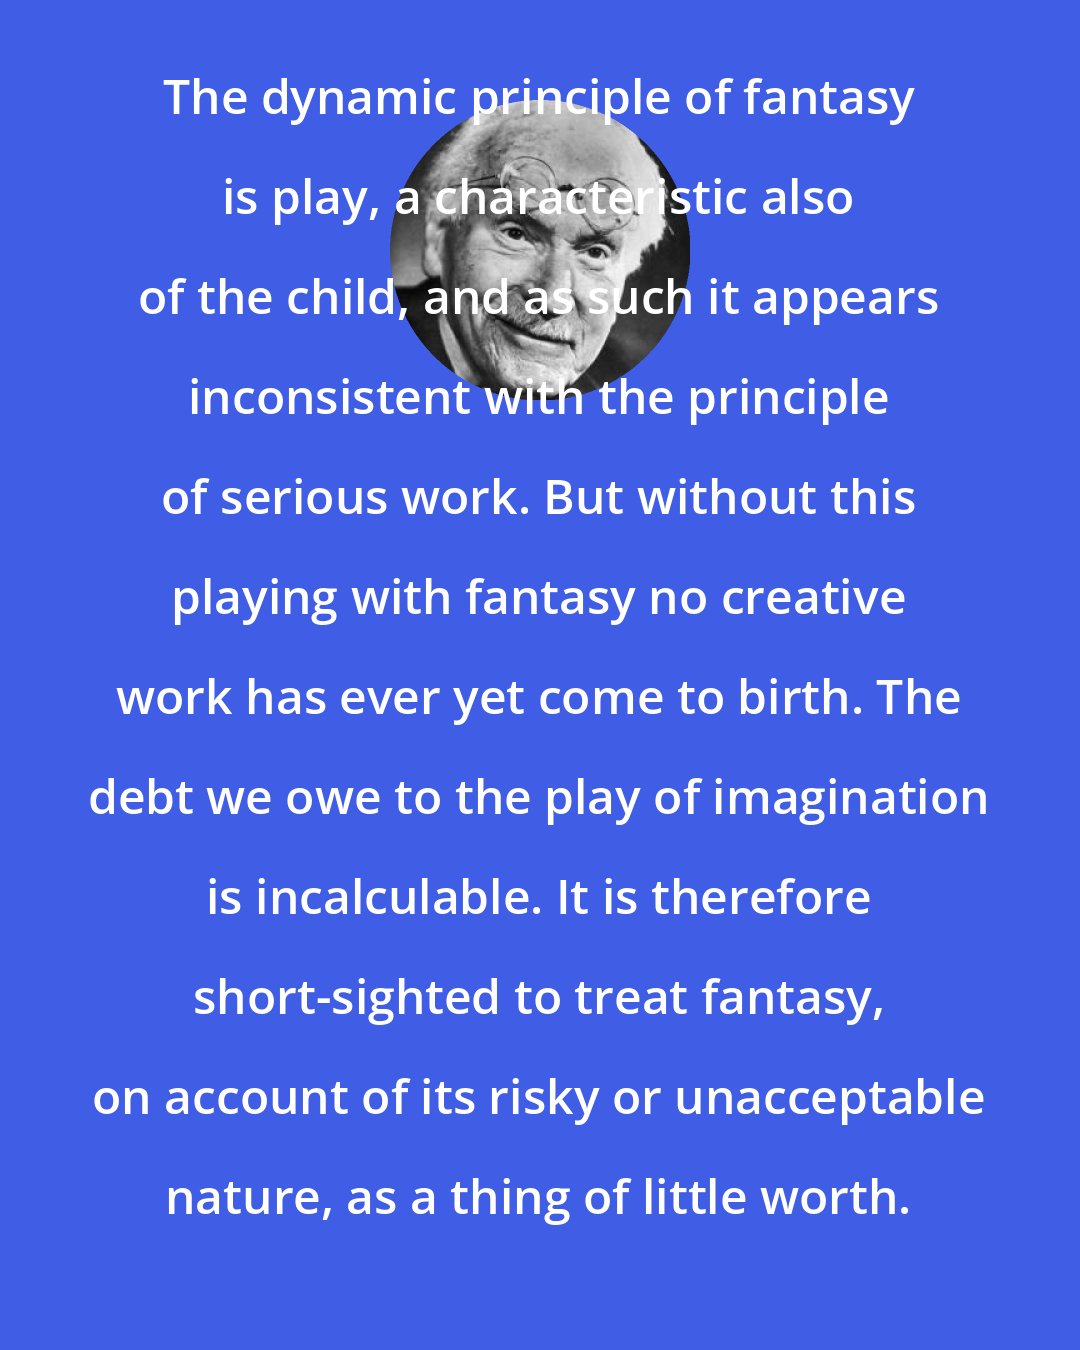 Carl Jung: The dynamic principle of fantasy is play, a characteristic also of the child, and as such it appears inconsistent with the principle of serious work. But without this playing with fantasy no creative work has ever yet come to birth. The debt we owe to the play of imagination is incalculable. It is therefore short-sighted to treat fantasy, on account of its risky or unacceptable nature, as a thing of little worth.